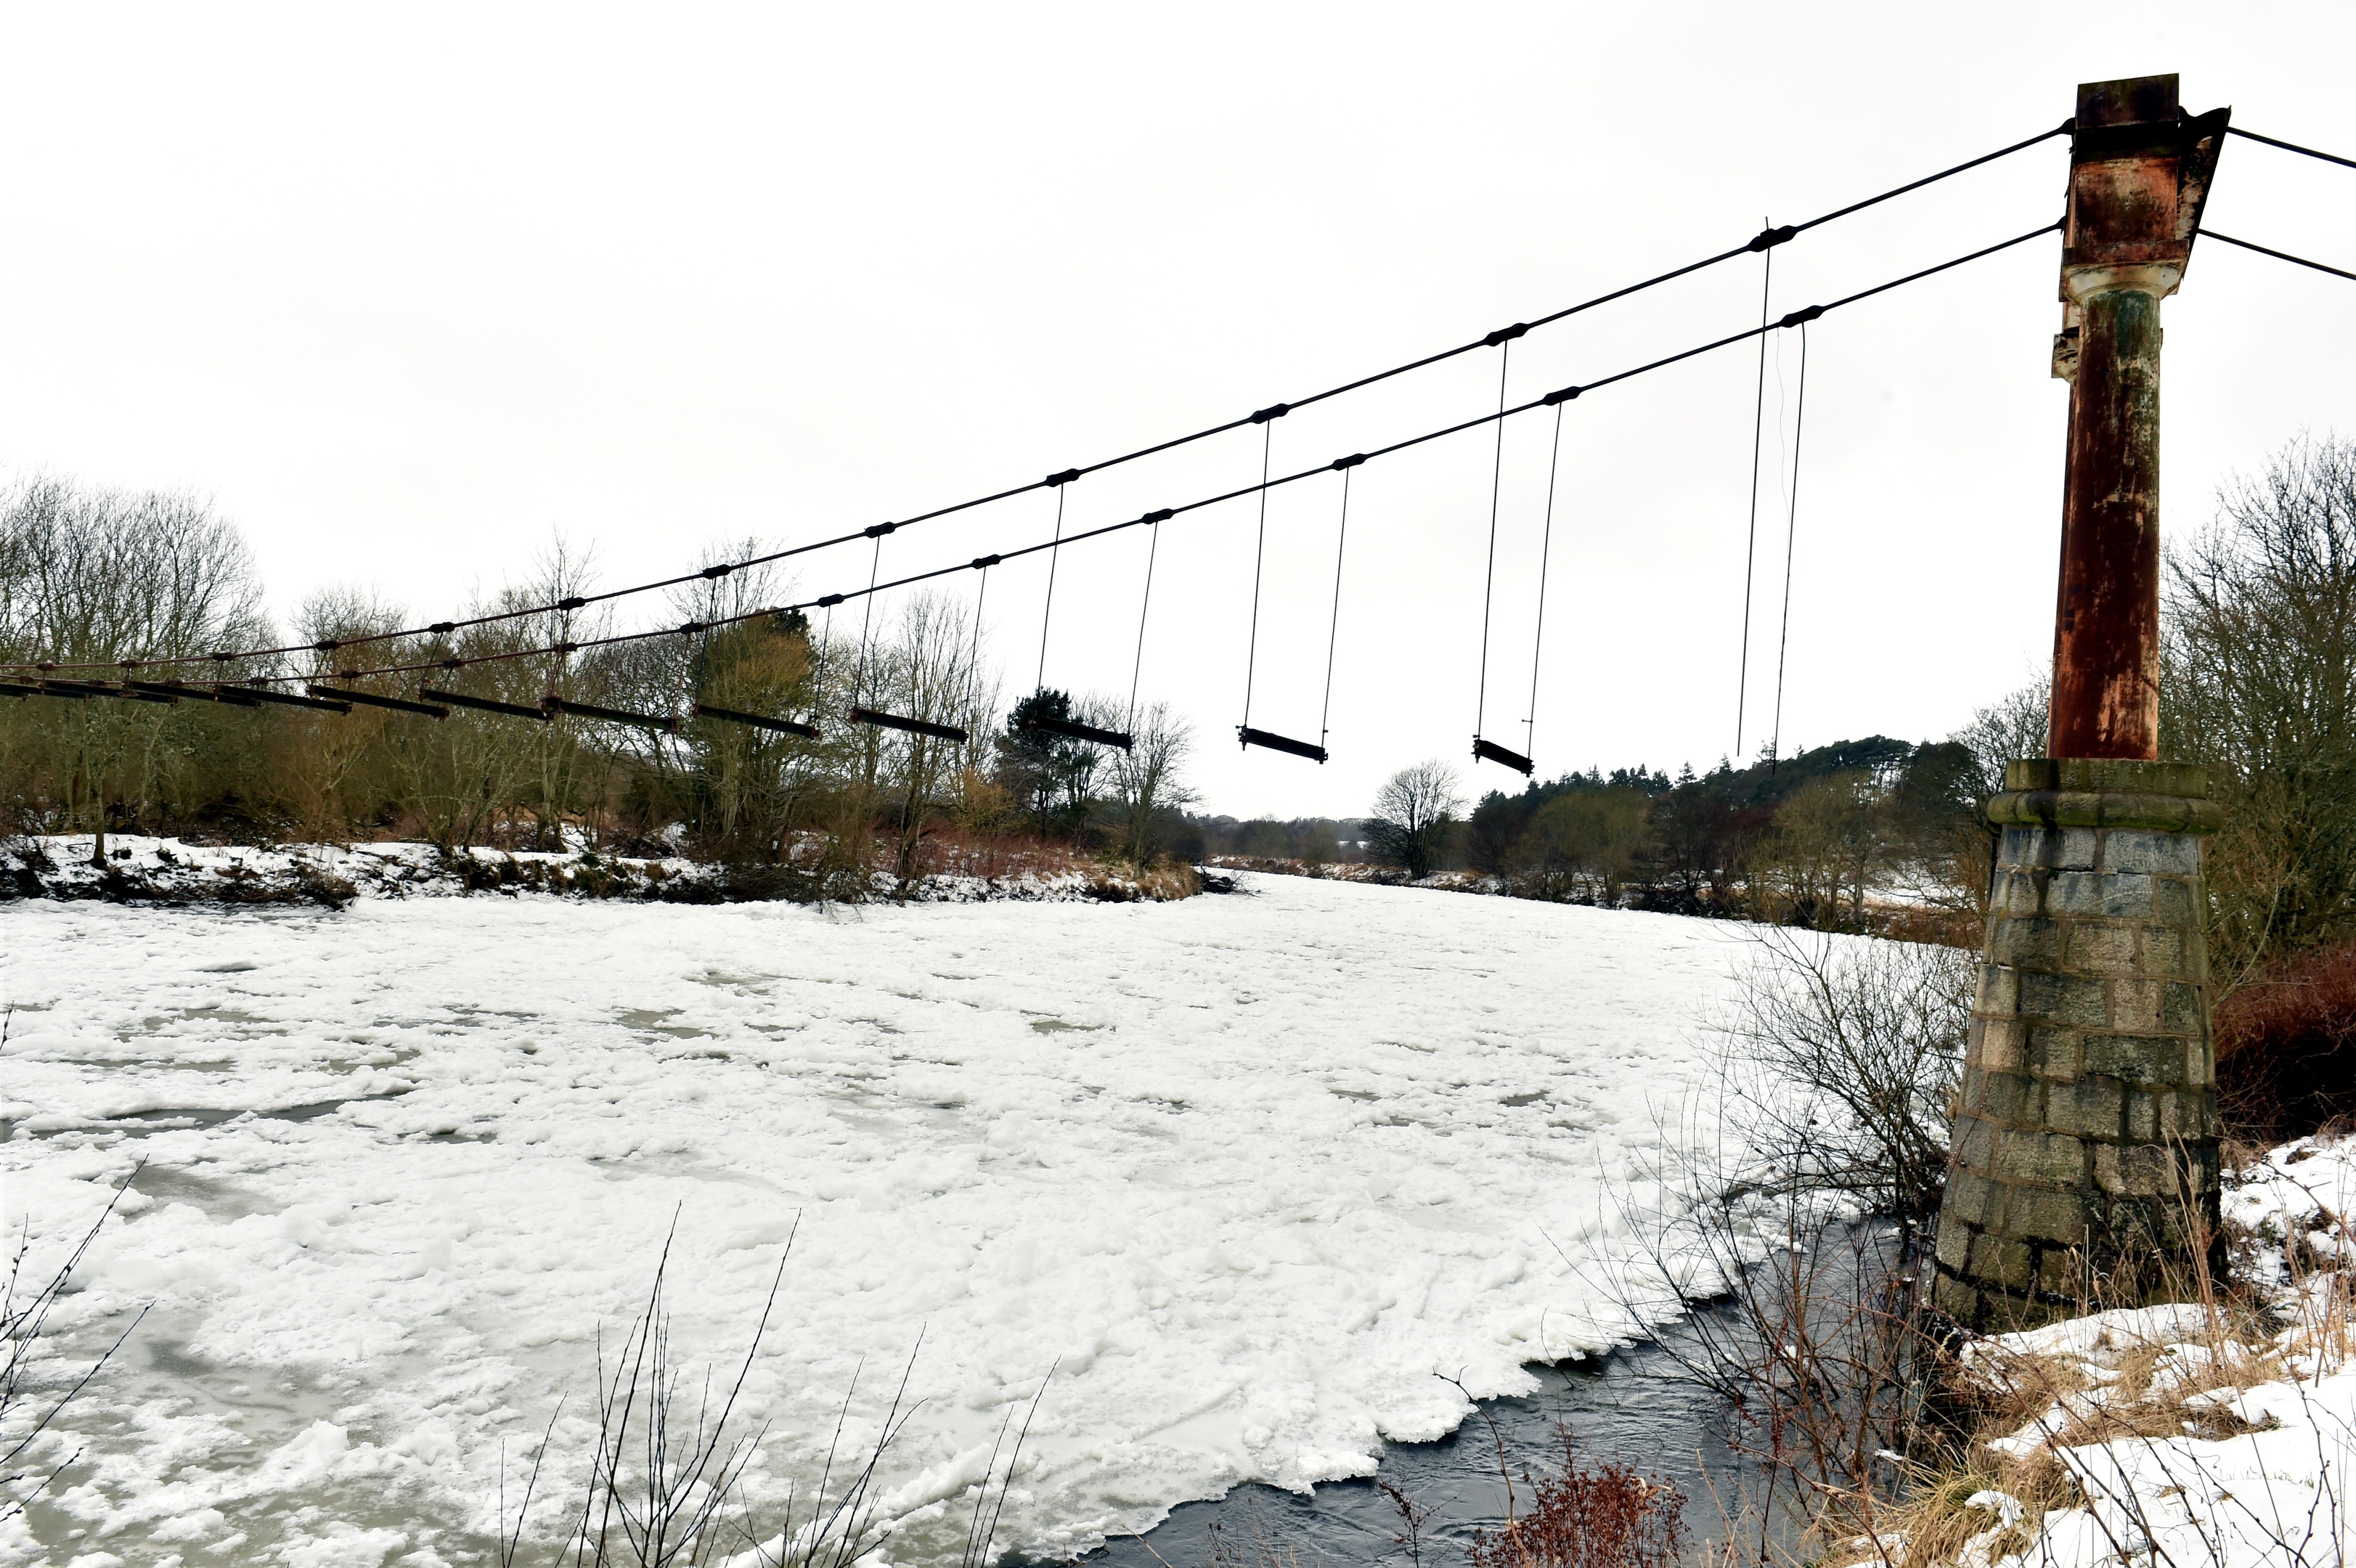 The Beast from the East - Ice covers the River Dee at the historic Shakkin Briggie - St. Devenick's Bridge which was a suspension footbridge which crosses the River Dee from Ardoe to Cults.